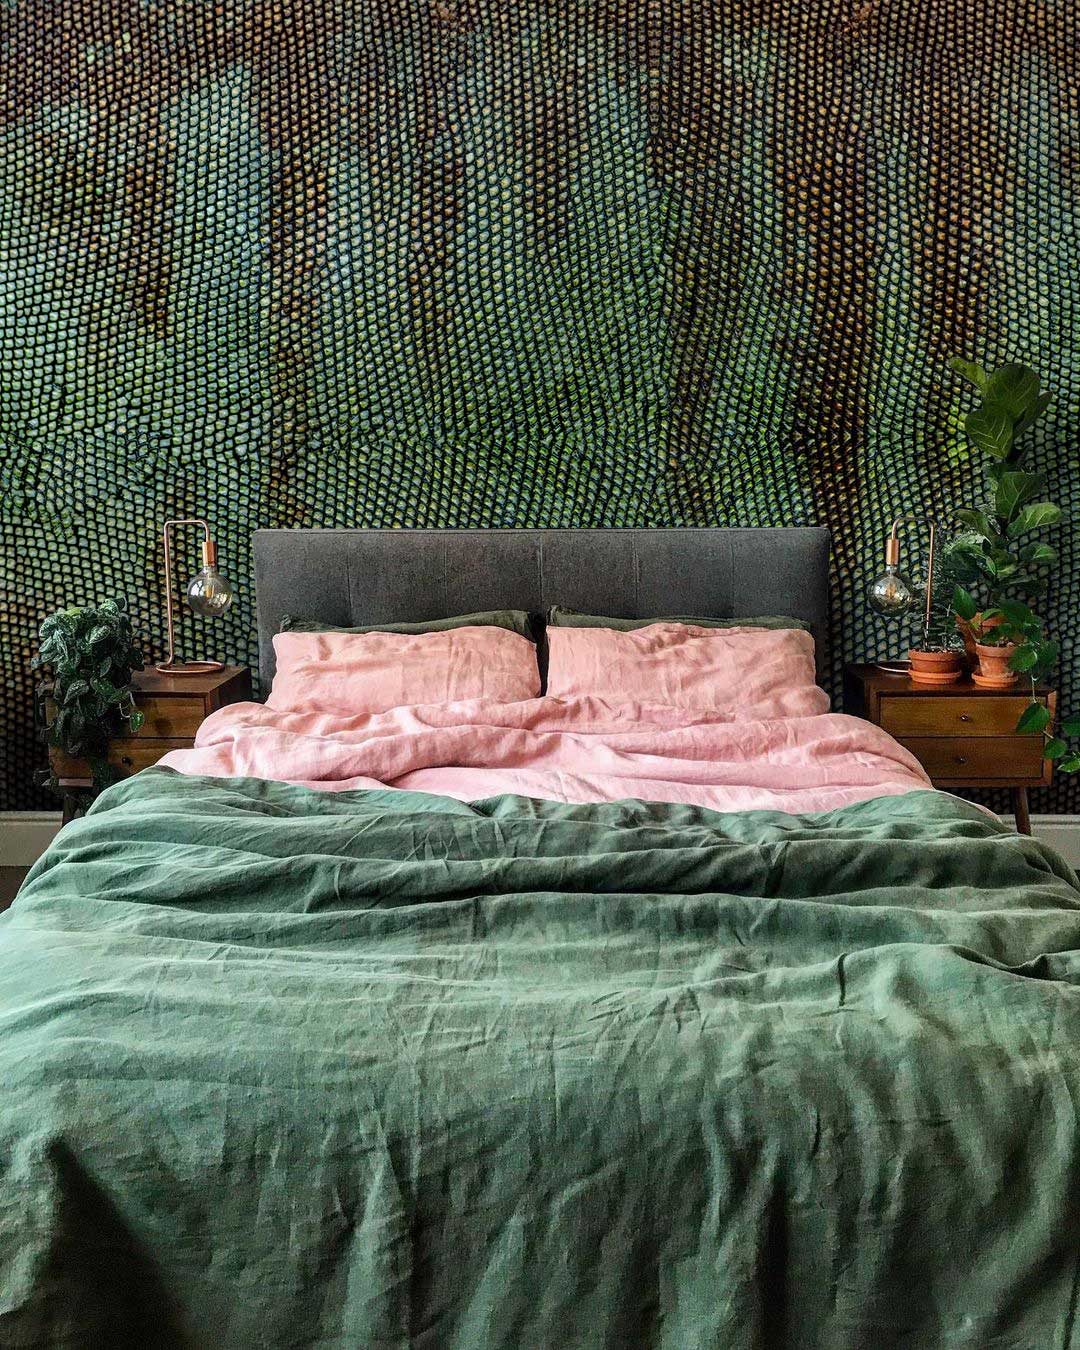 Animal wallpaper made of jasper snake skin, perfect for decorating a bedroom.